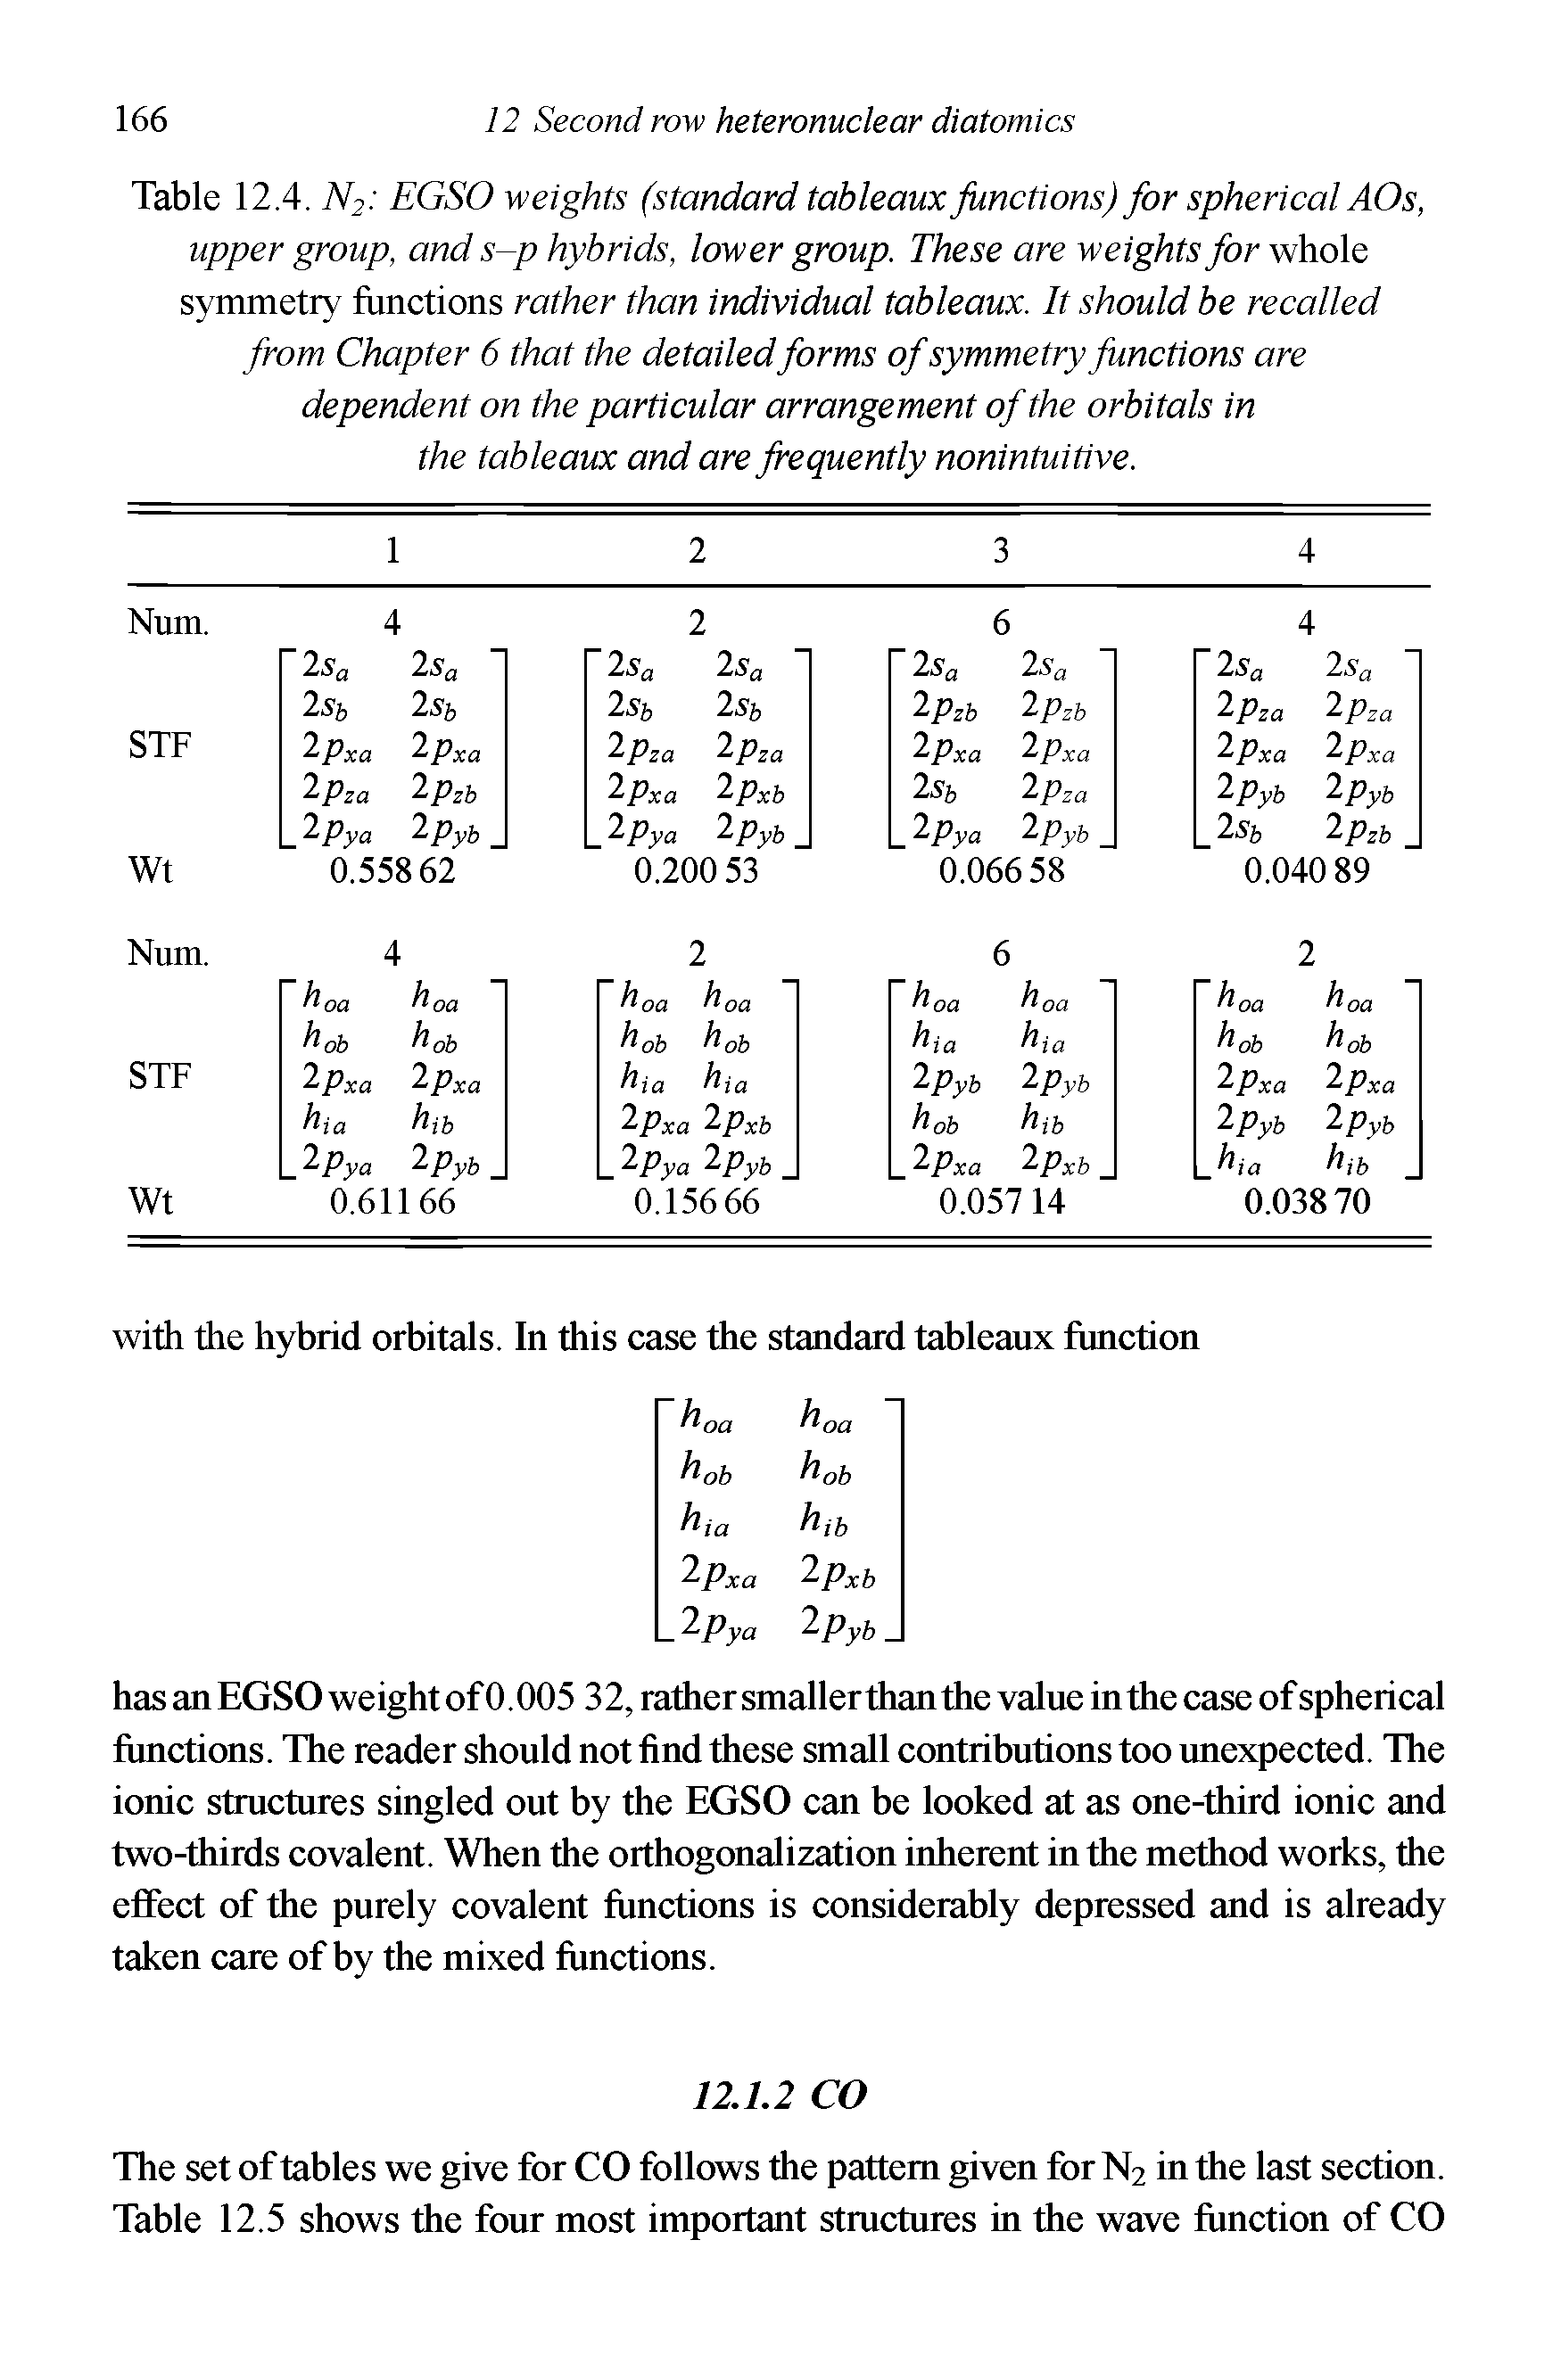 Table 2A.N2 EGSO weights (standard tableaux functions) for spherical AOs, upper group, and s-p hybrids, lower group. These are weights for whole symmetry functions rather than individual tableaux. It should be recalled from Chapter 6 that the detailed forms of symmetry functions are dependent on the particular arrangement of the orbitals in the tableaux and are frequently nonintuitive.